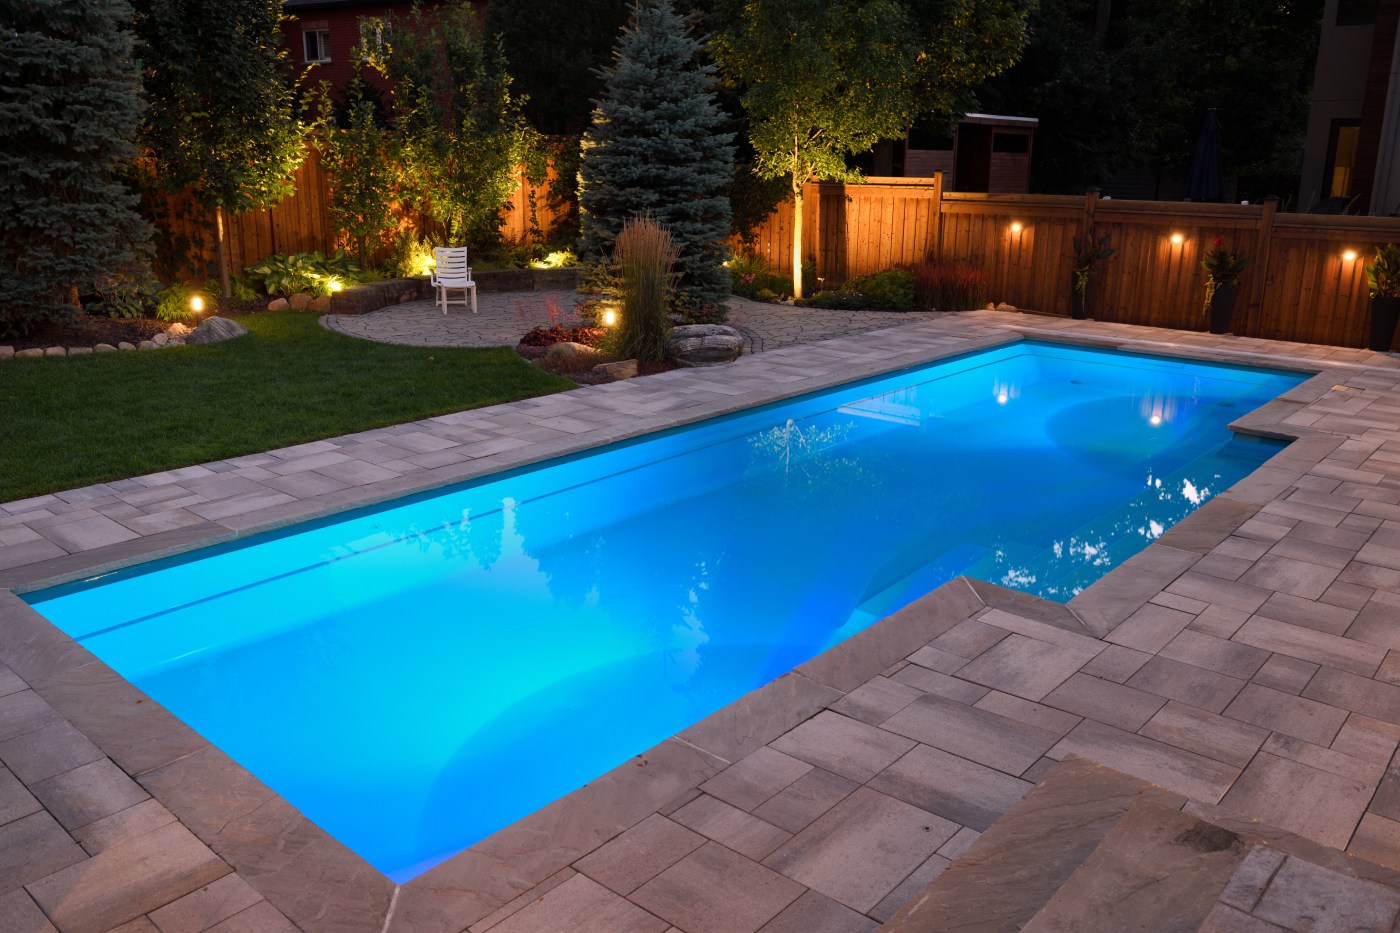 Pool Remodeling & Resurfacing: A Worthwhile Investment